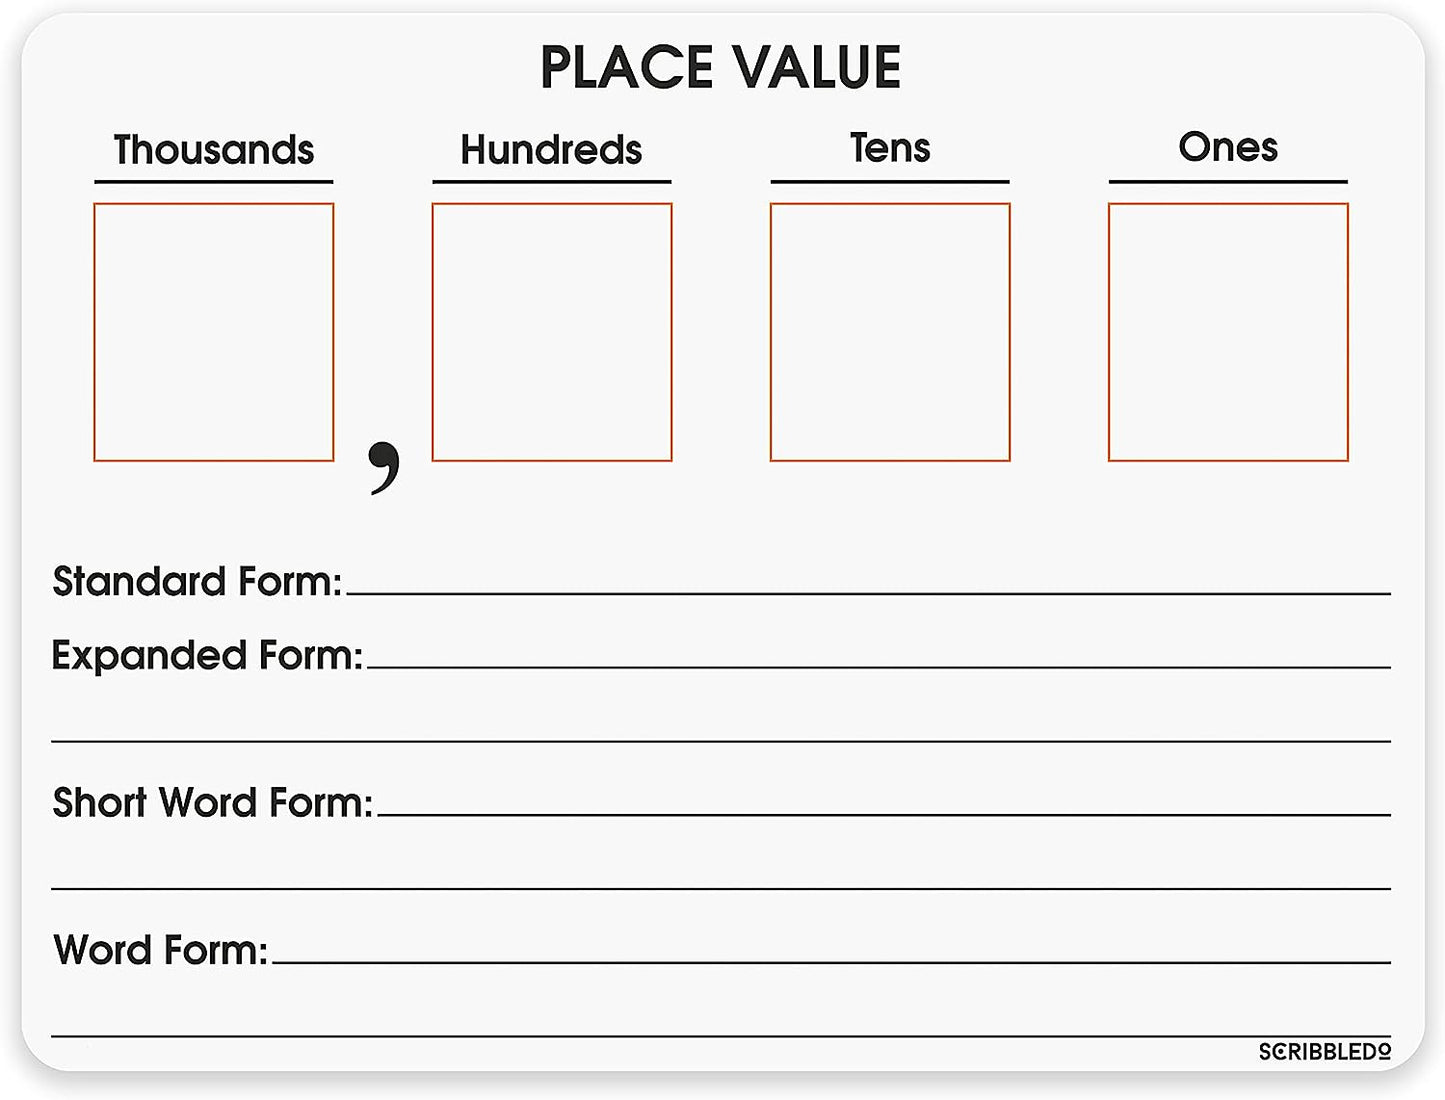 place value chart whiteboard 9x12